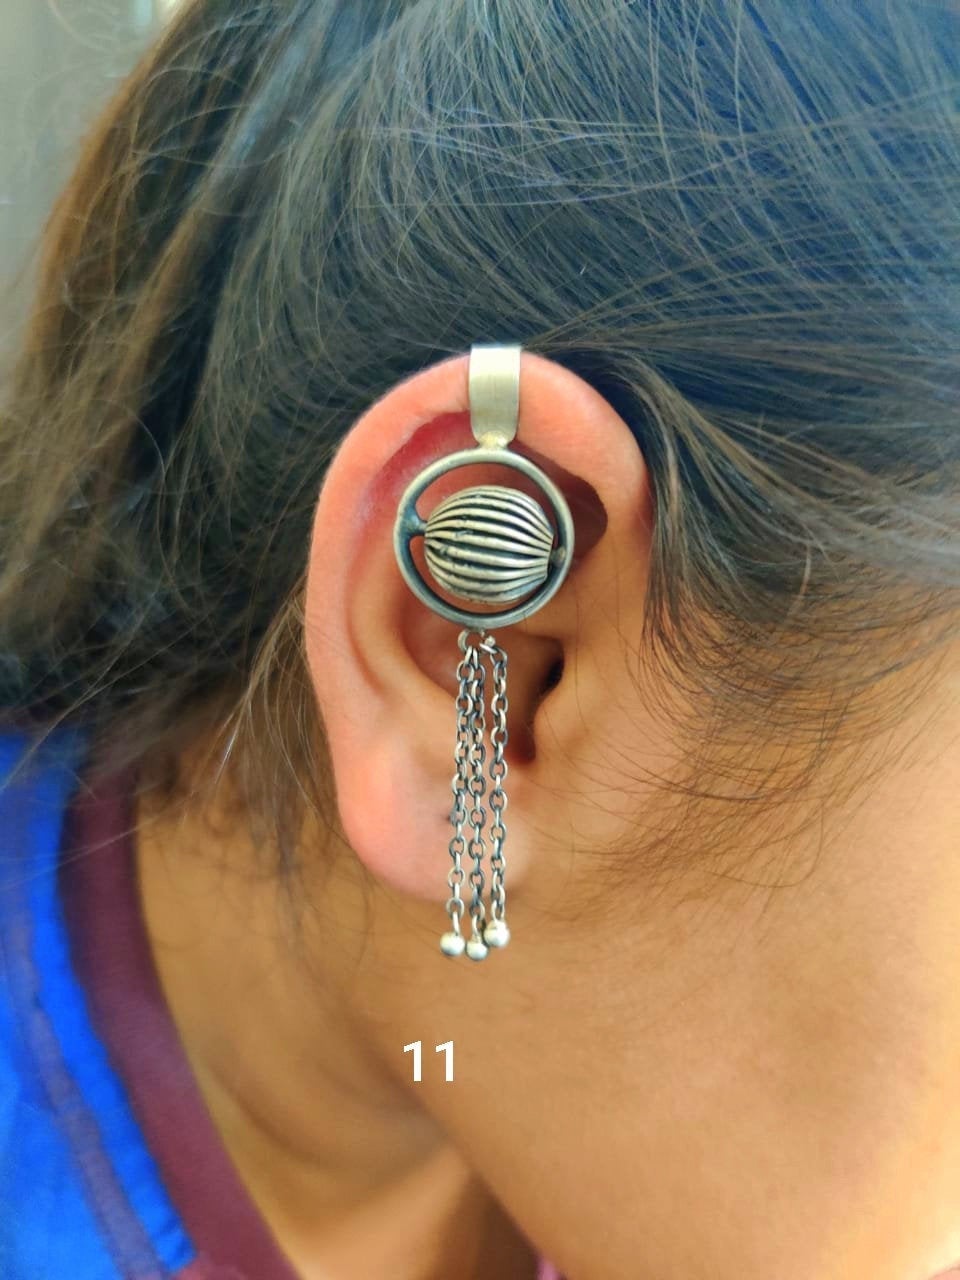 Vintage antique design handmade 925 sterling silver awesome ear clip earring ear plug upper earring jewelry ,tribal jewelry india s846 - TRIBAL ORNAMENTS